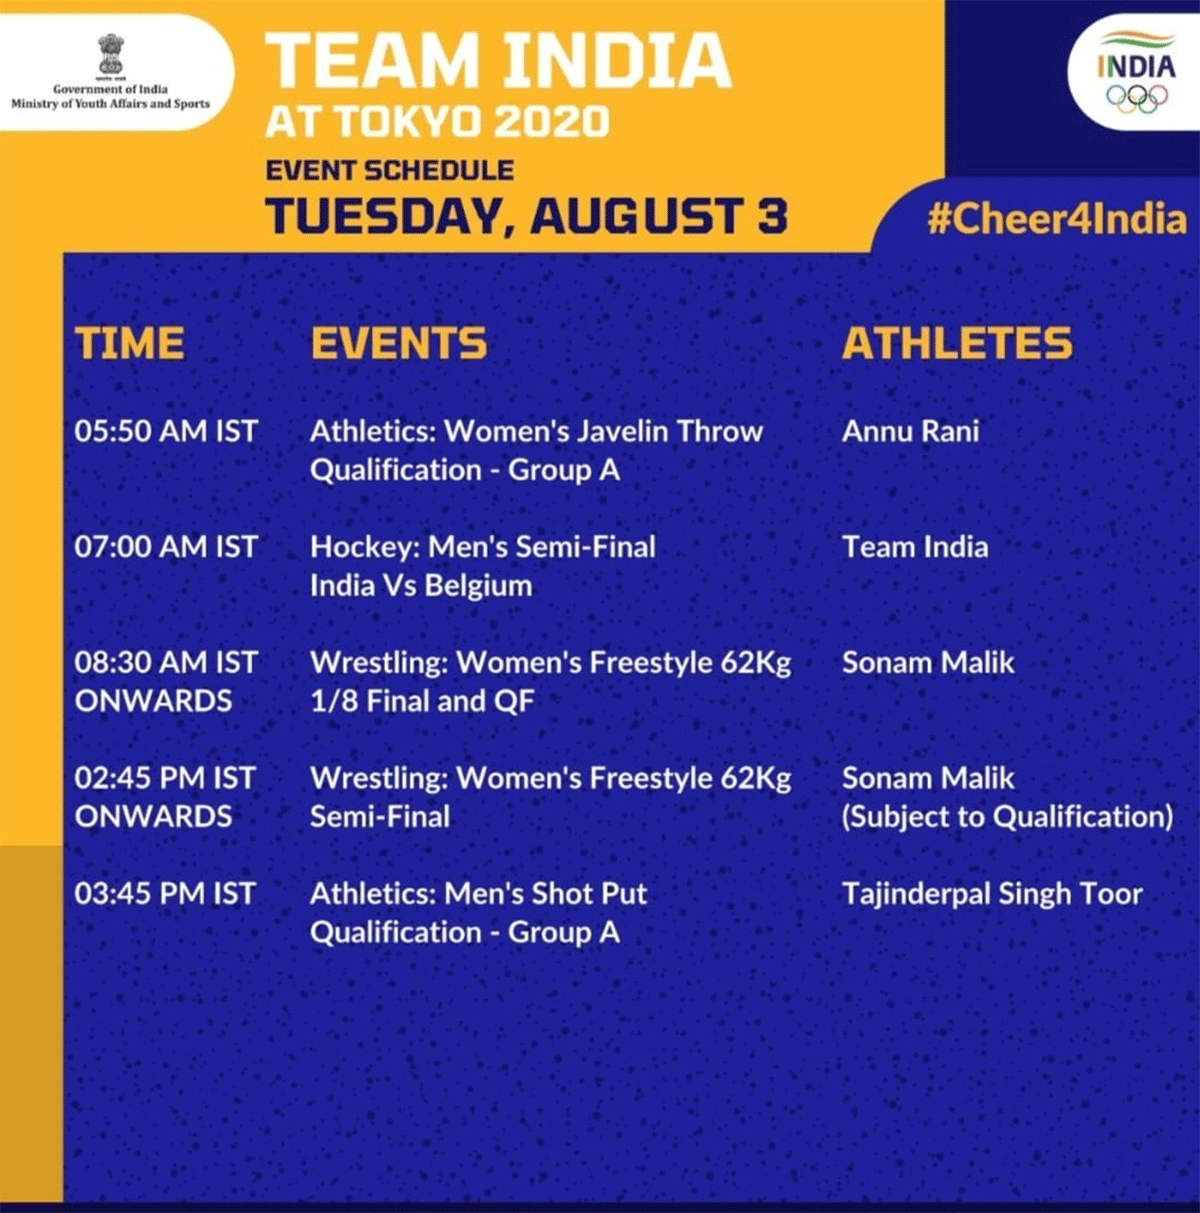 Indian athletes' schedule for Tuesday, August 3